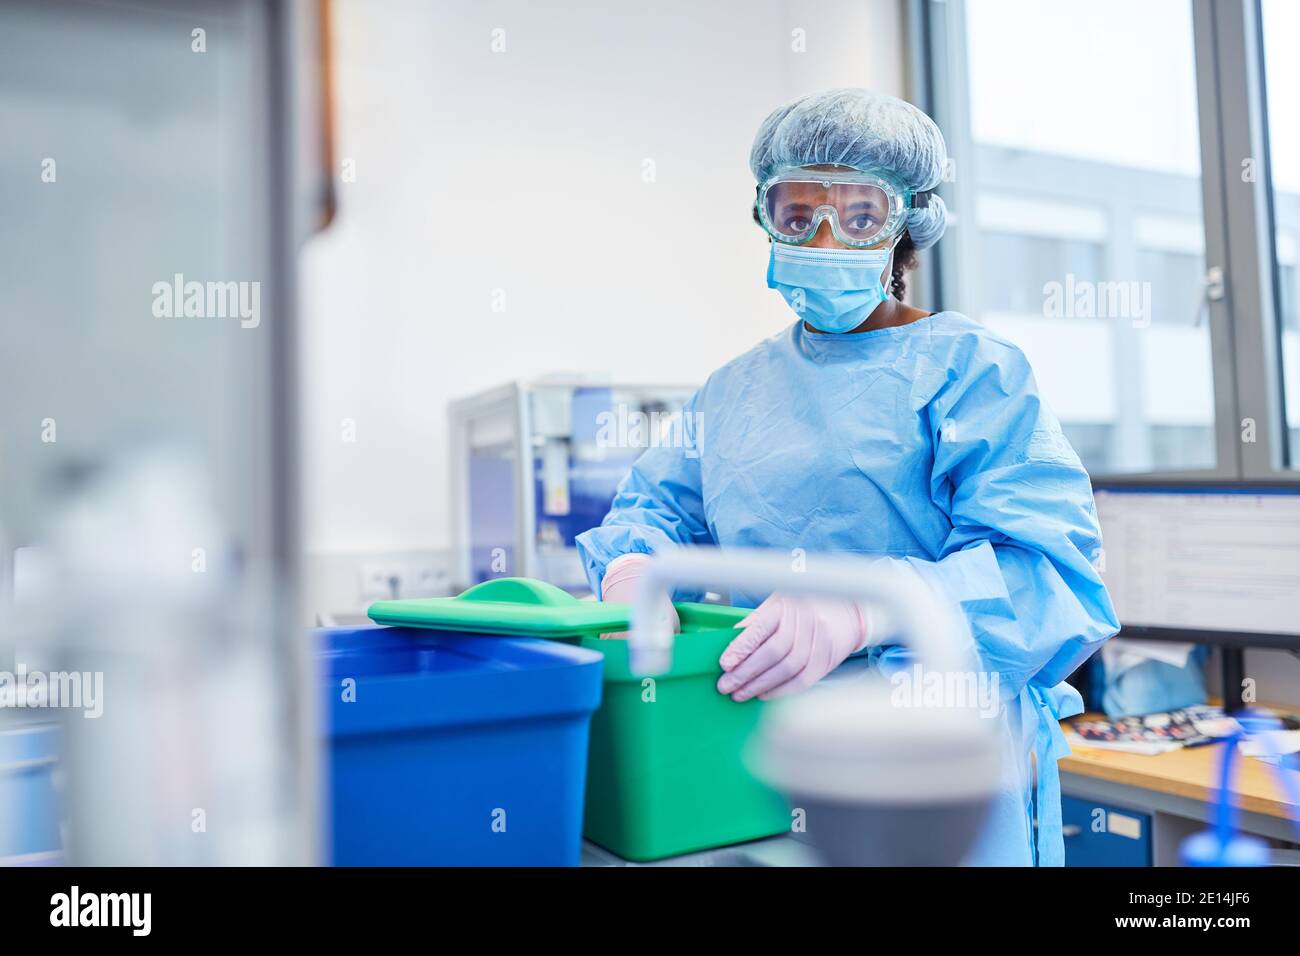 African woman works as a researcher in the laboratory with protective clothing on Covid-19 vaccine for coronavirus pandemic Stock Photo